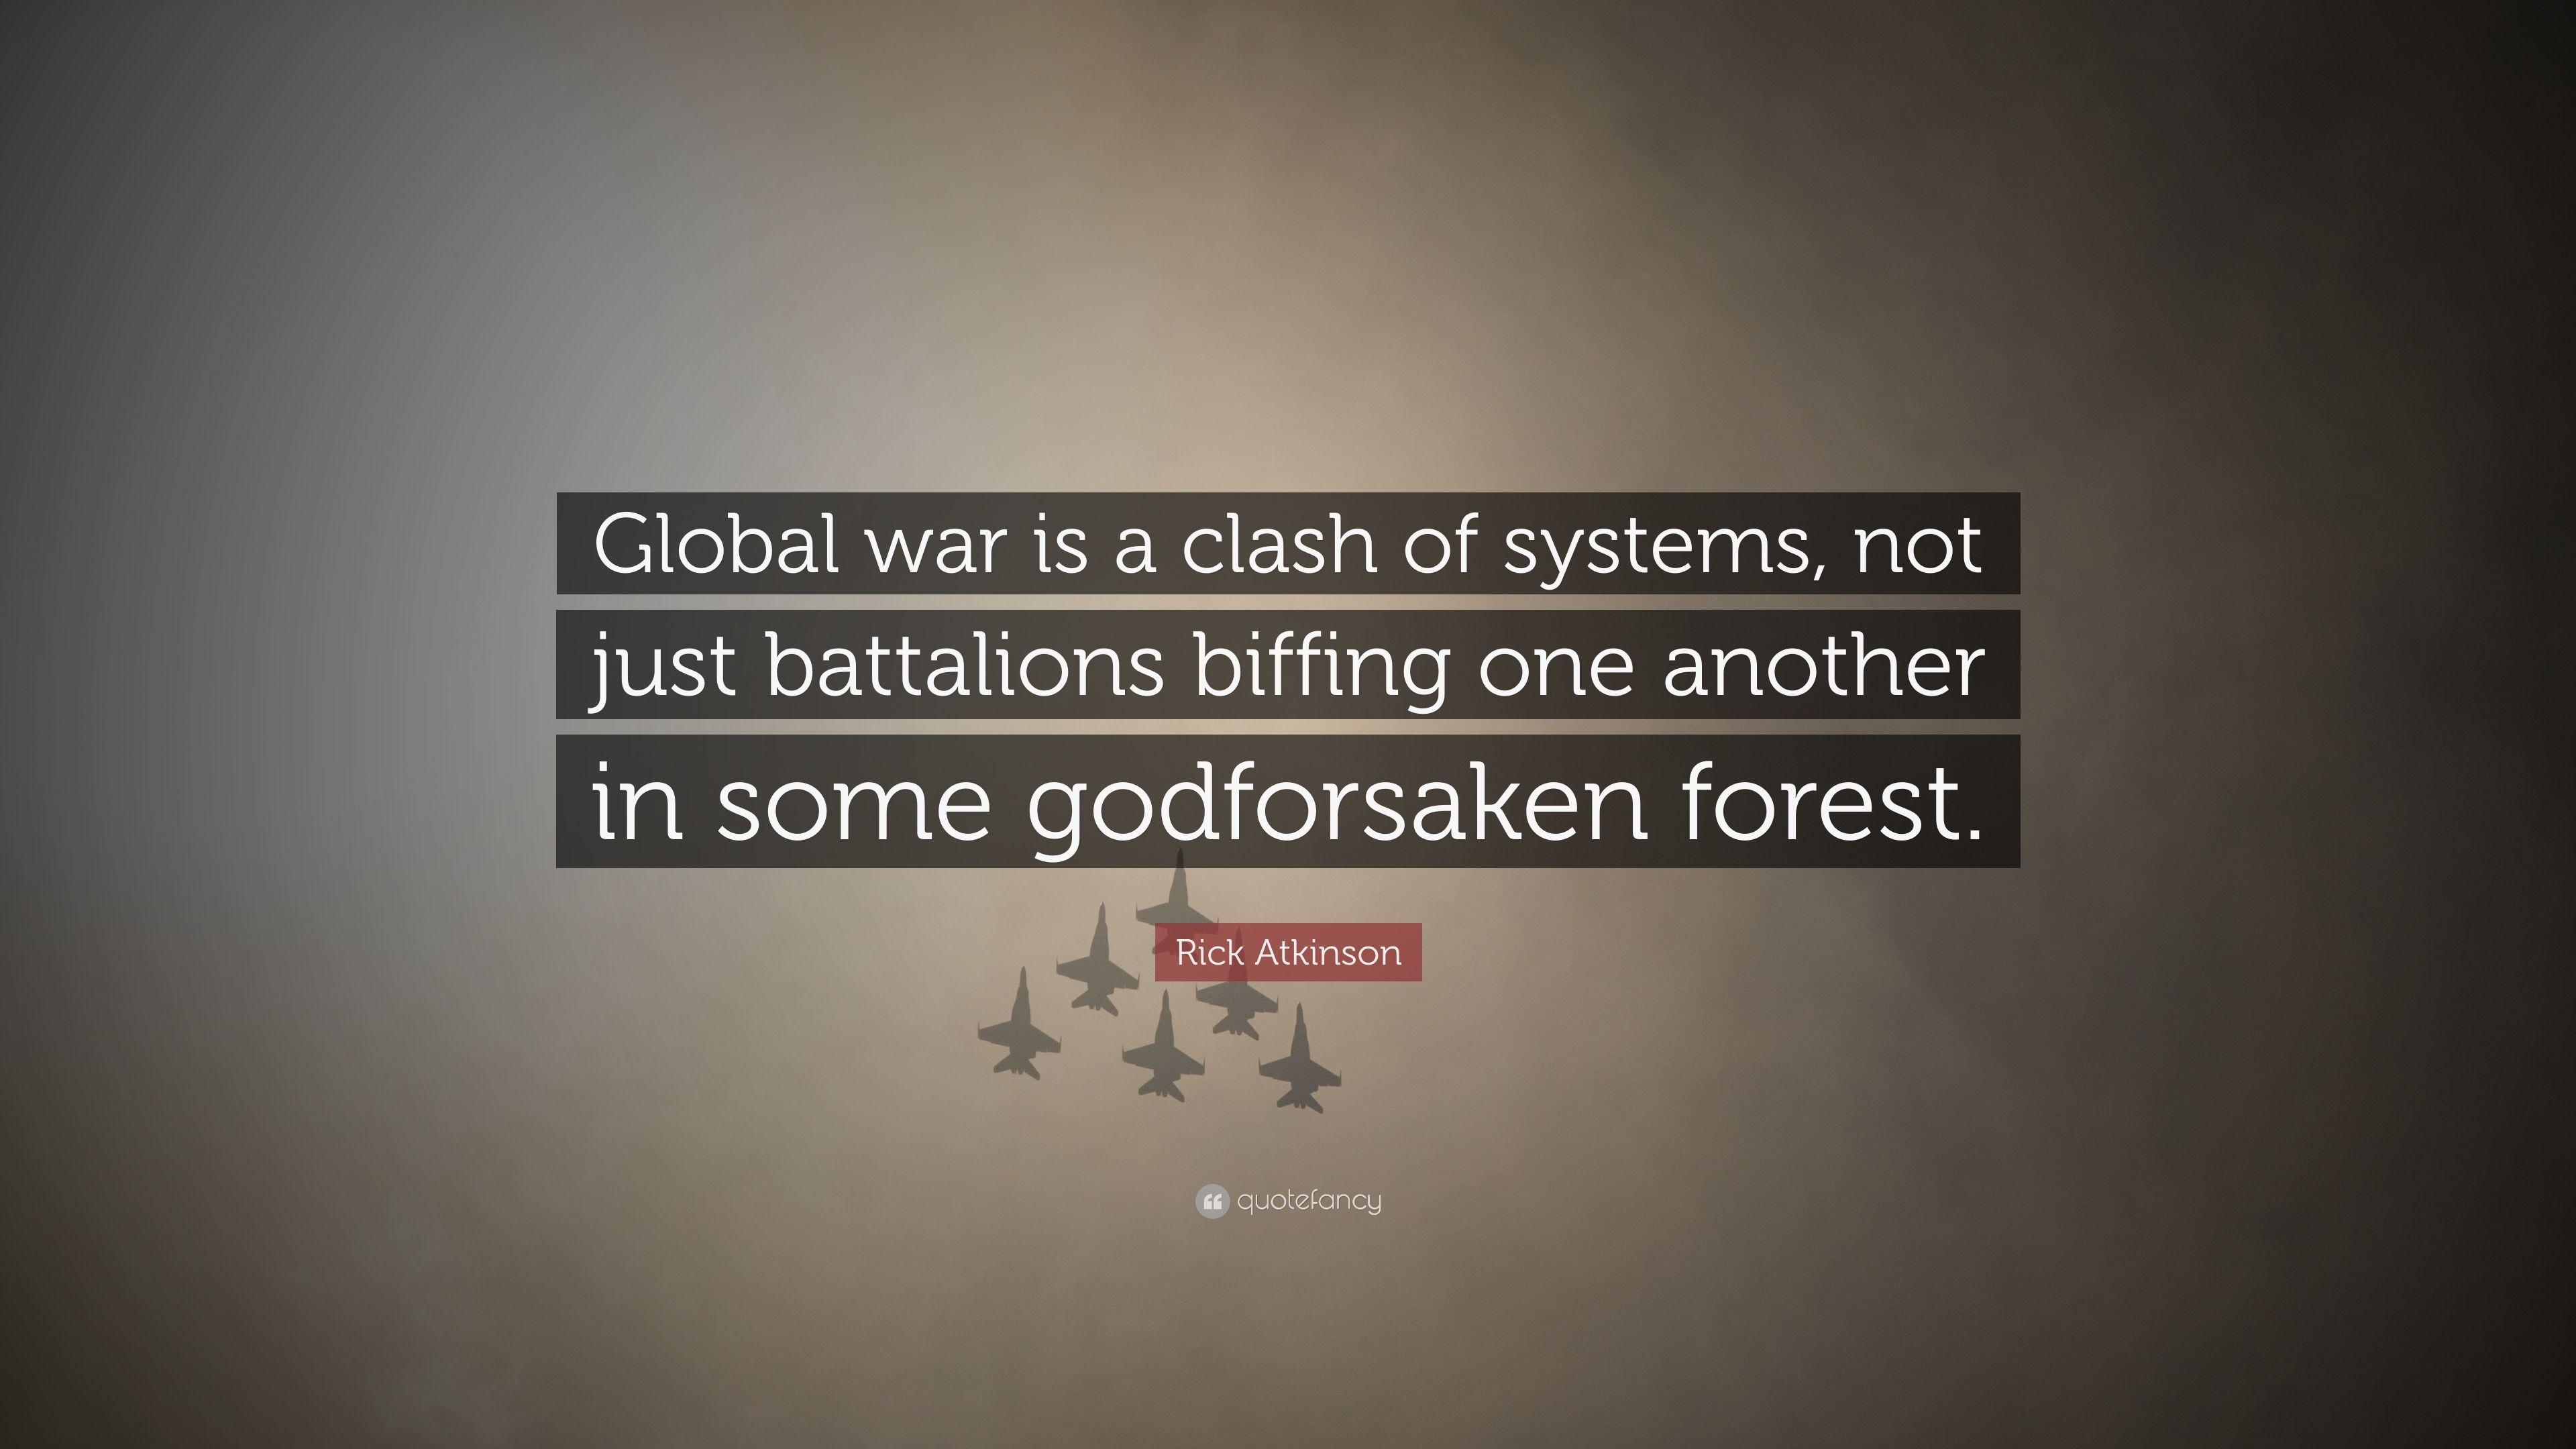 Rick Atkinson Quote: “Global war is a clash of systems, not just